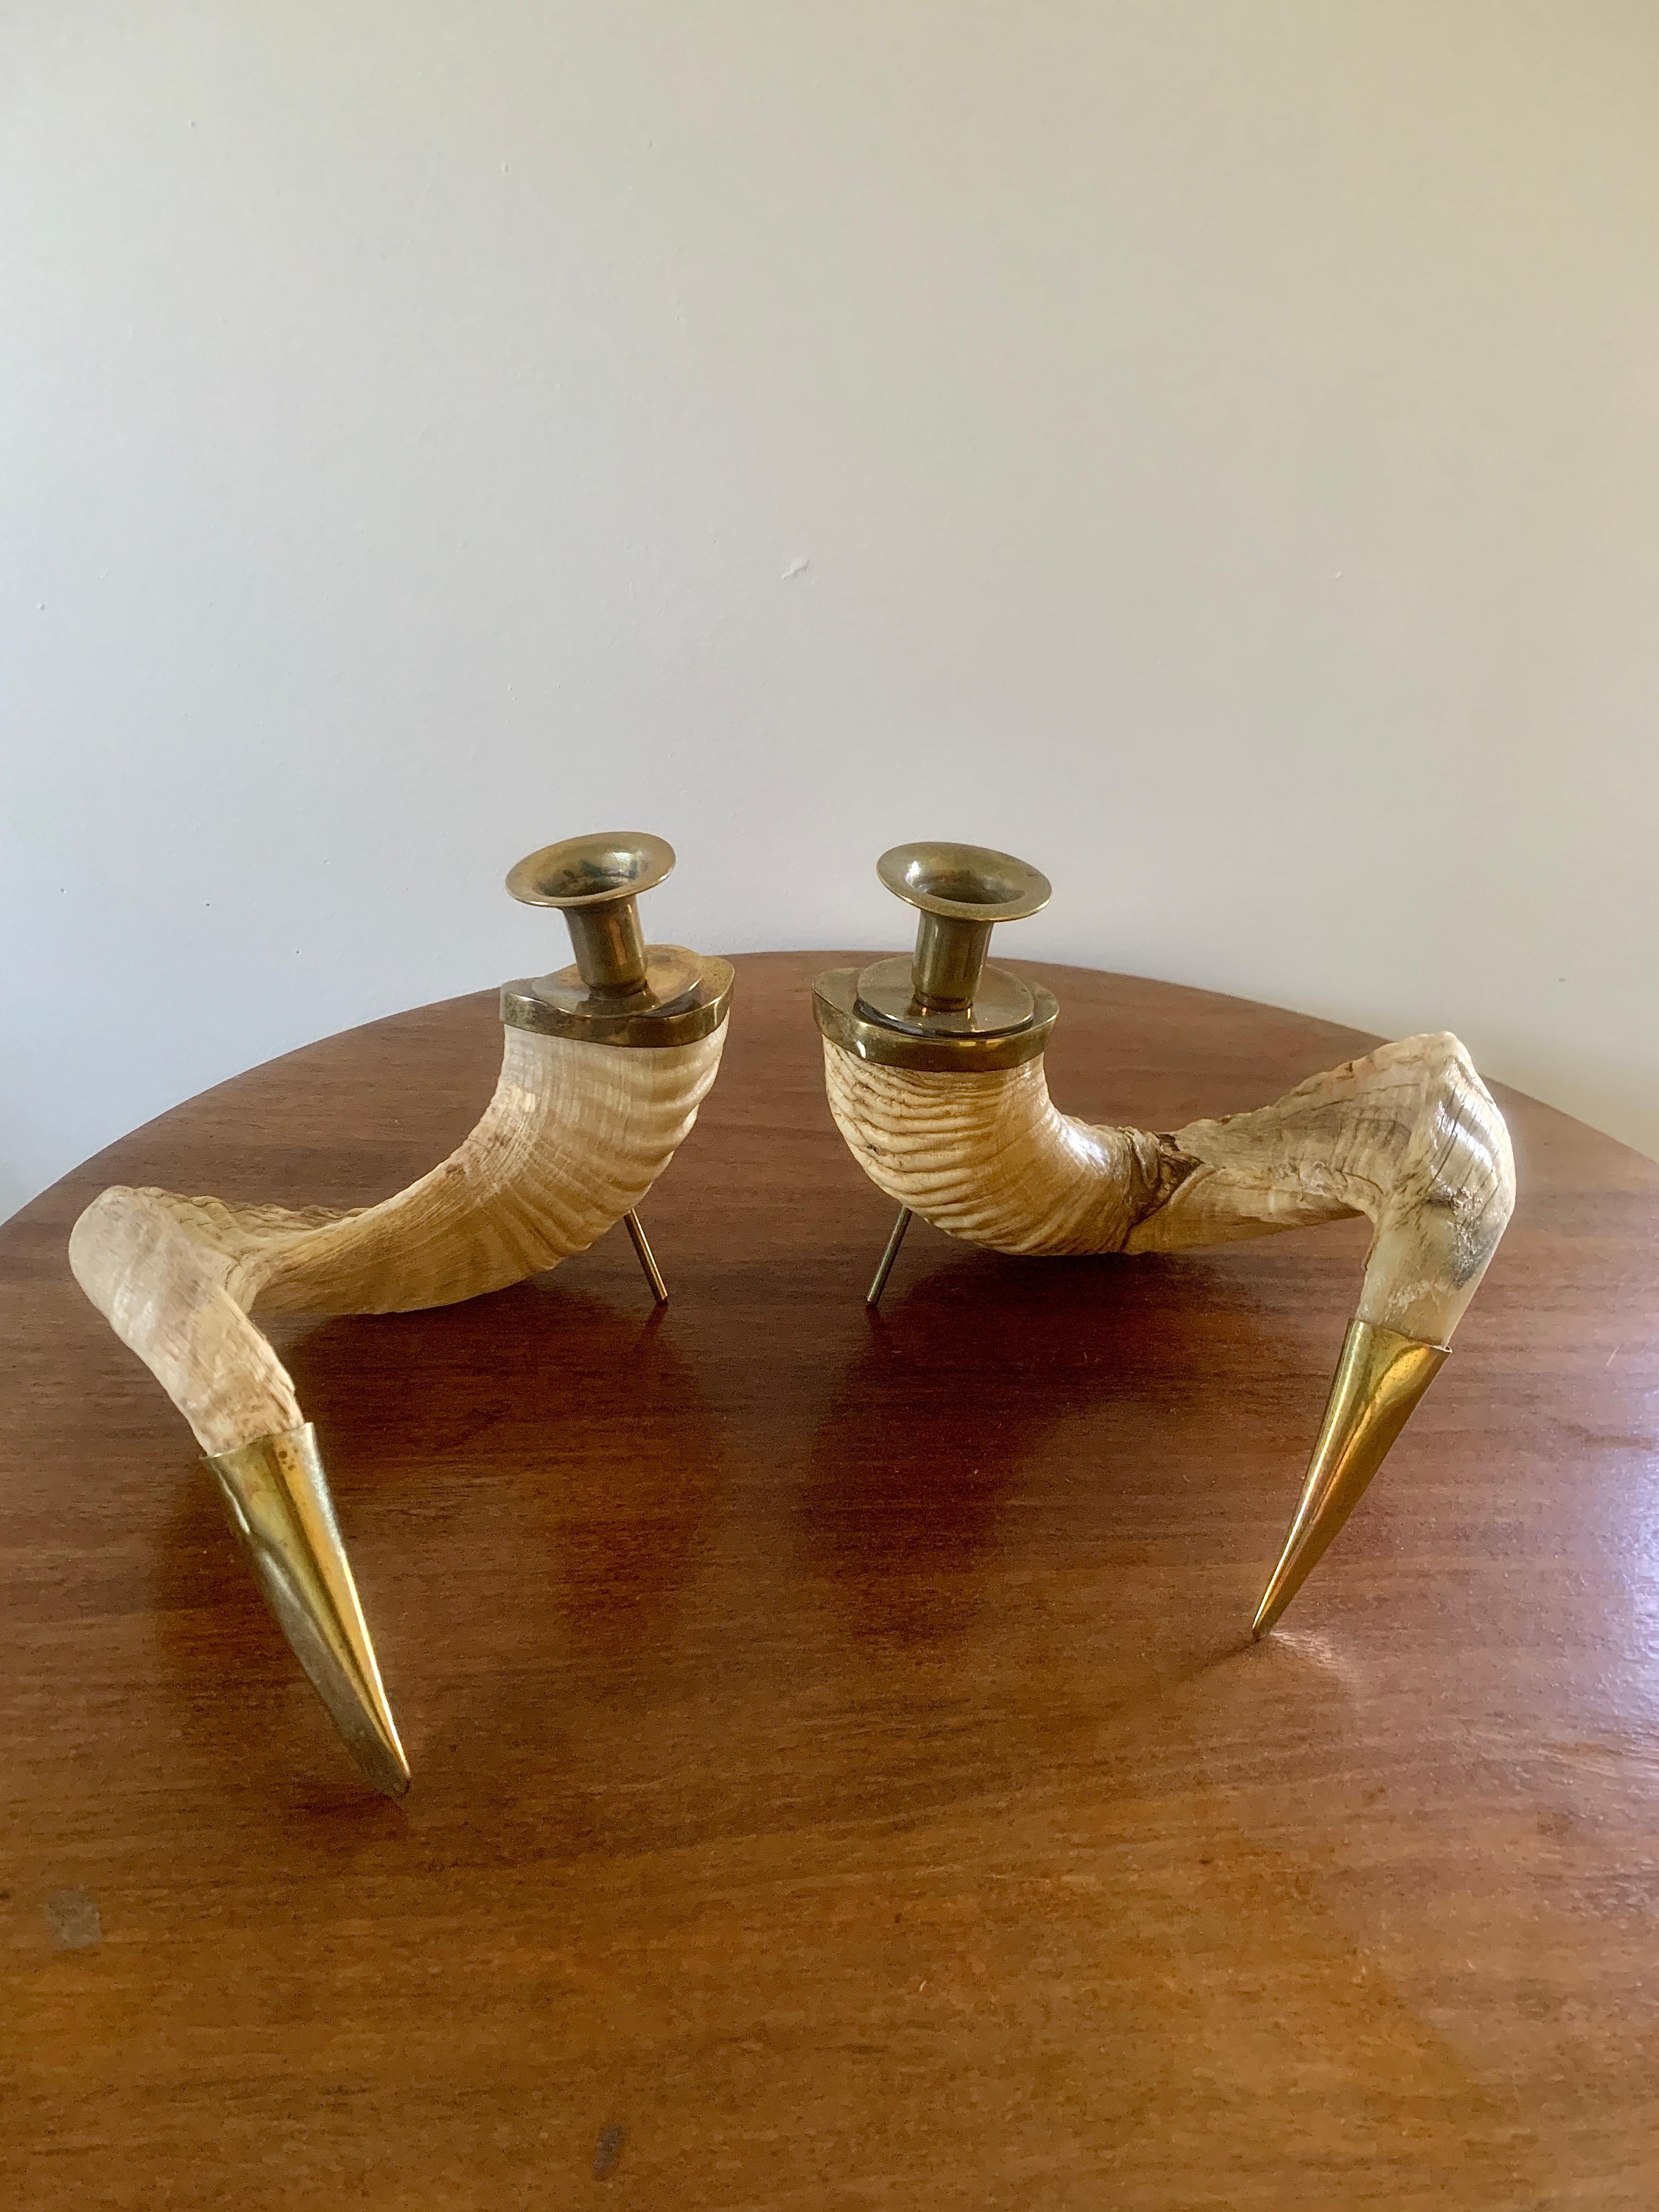 American Mid-20th Century Rams Horn Candle Holders, Pair